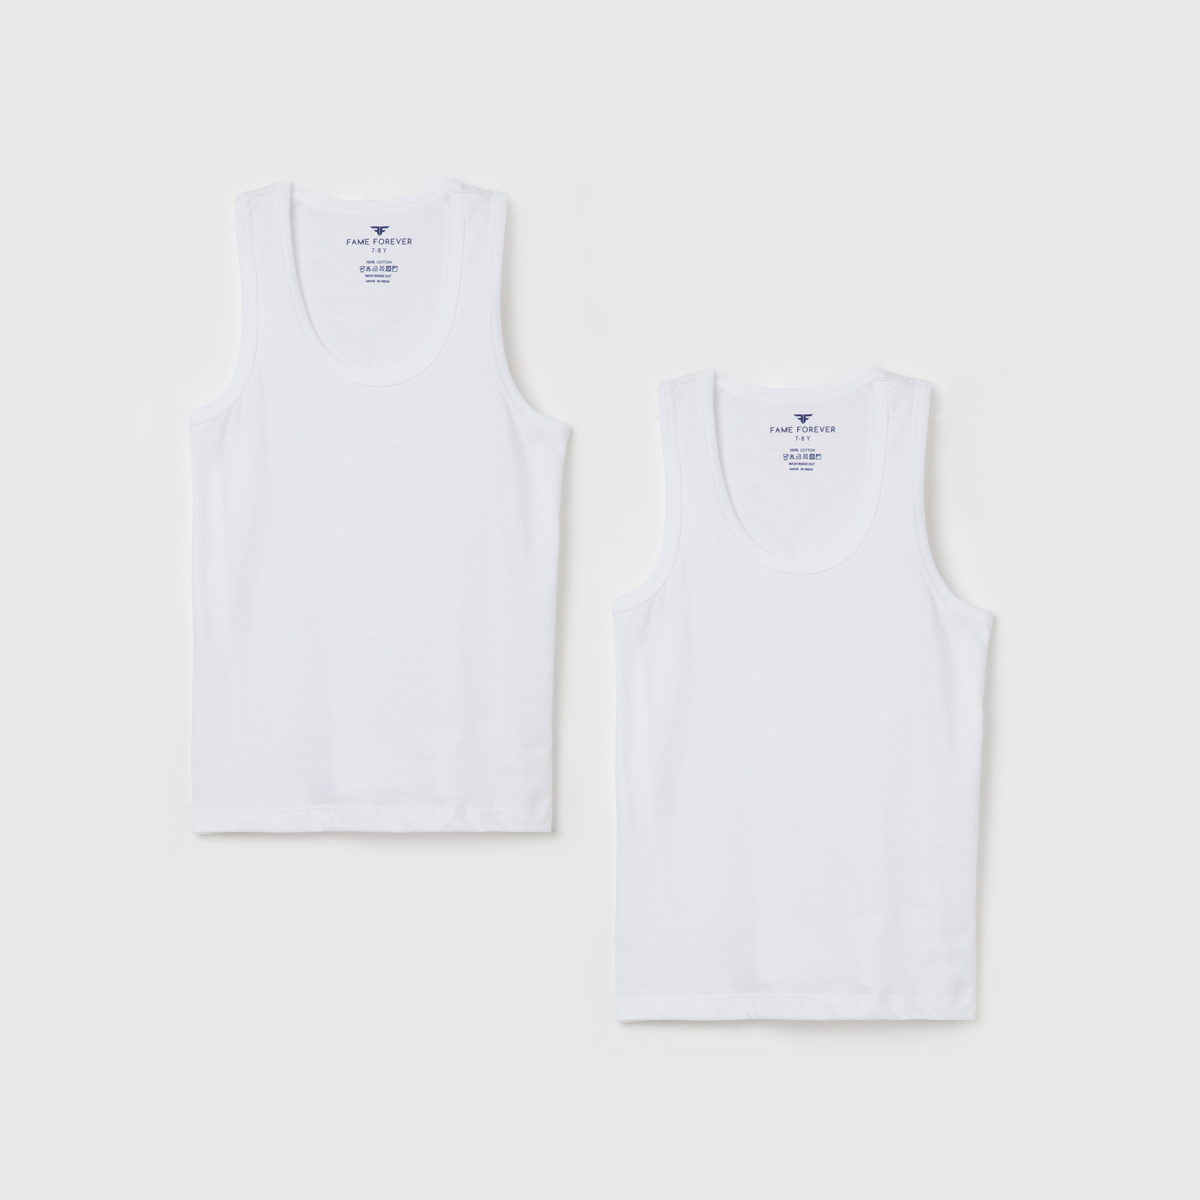 FAME FOREVER Solid Slleeveless Cotton Vests - Pack of 2 Pcs.